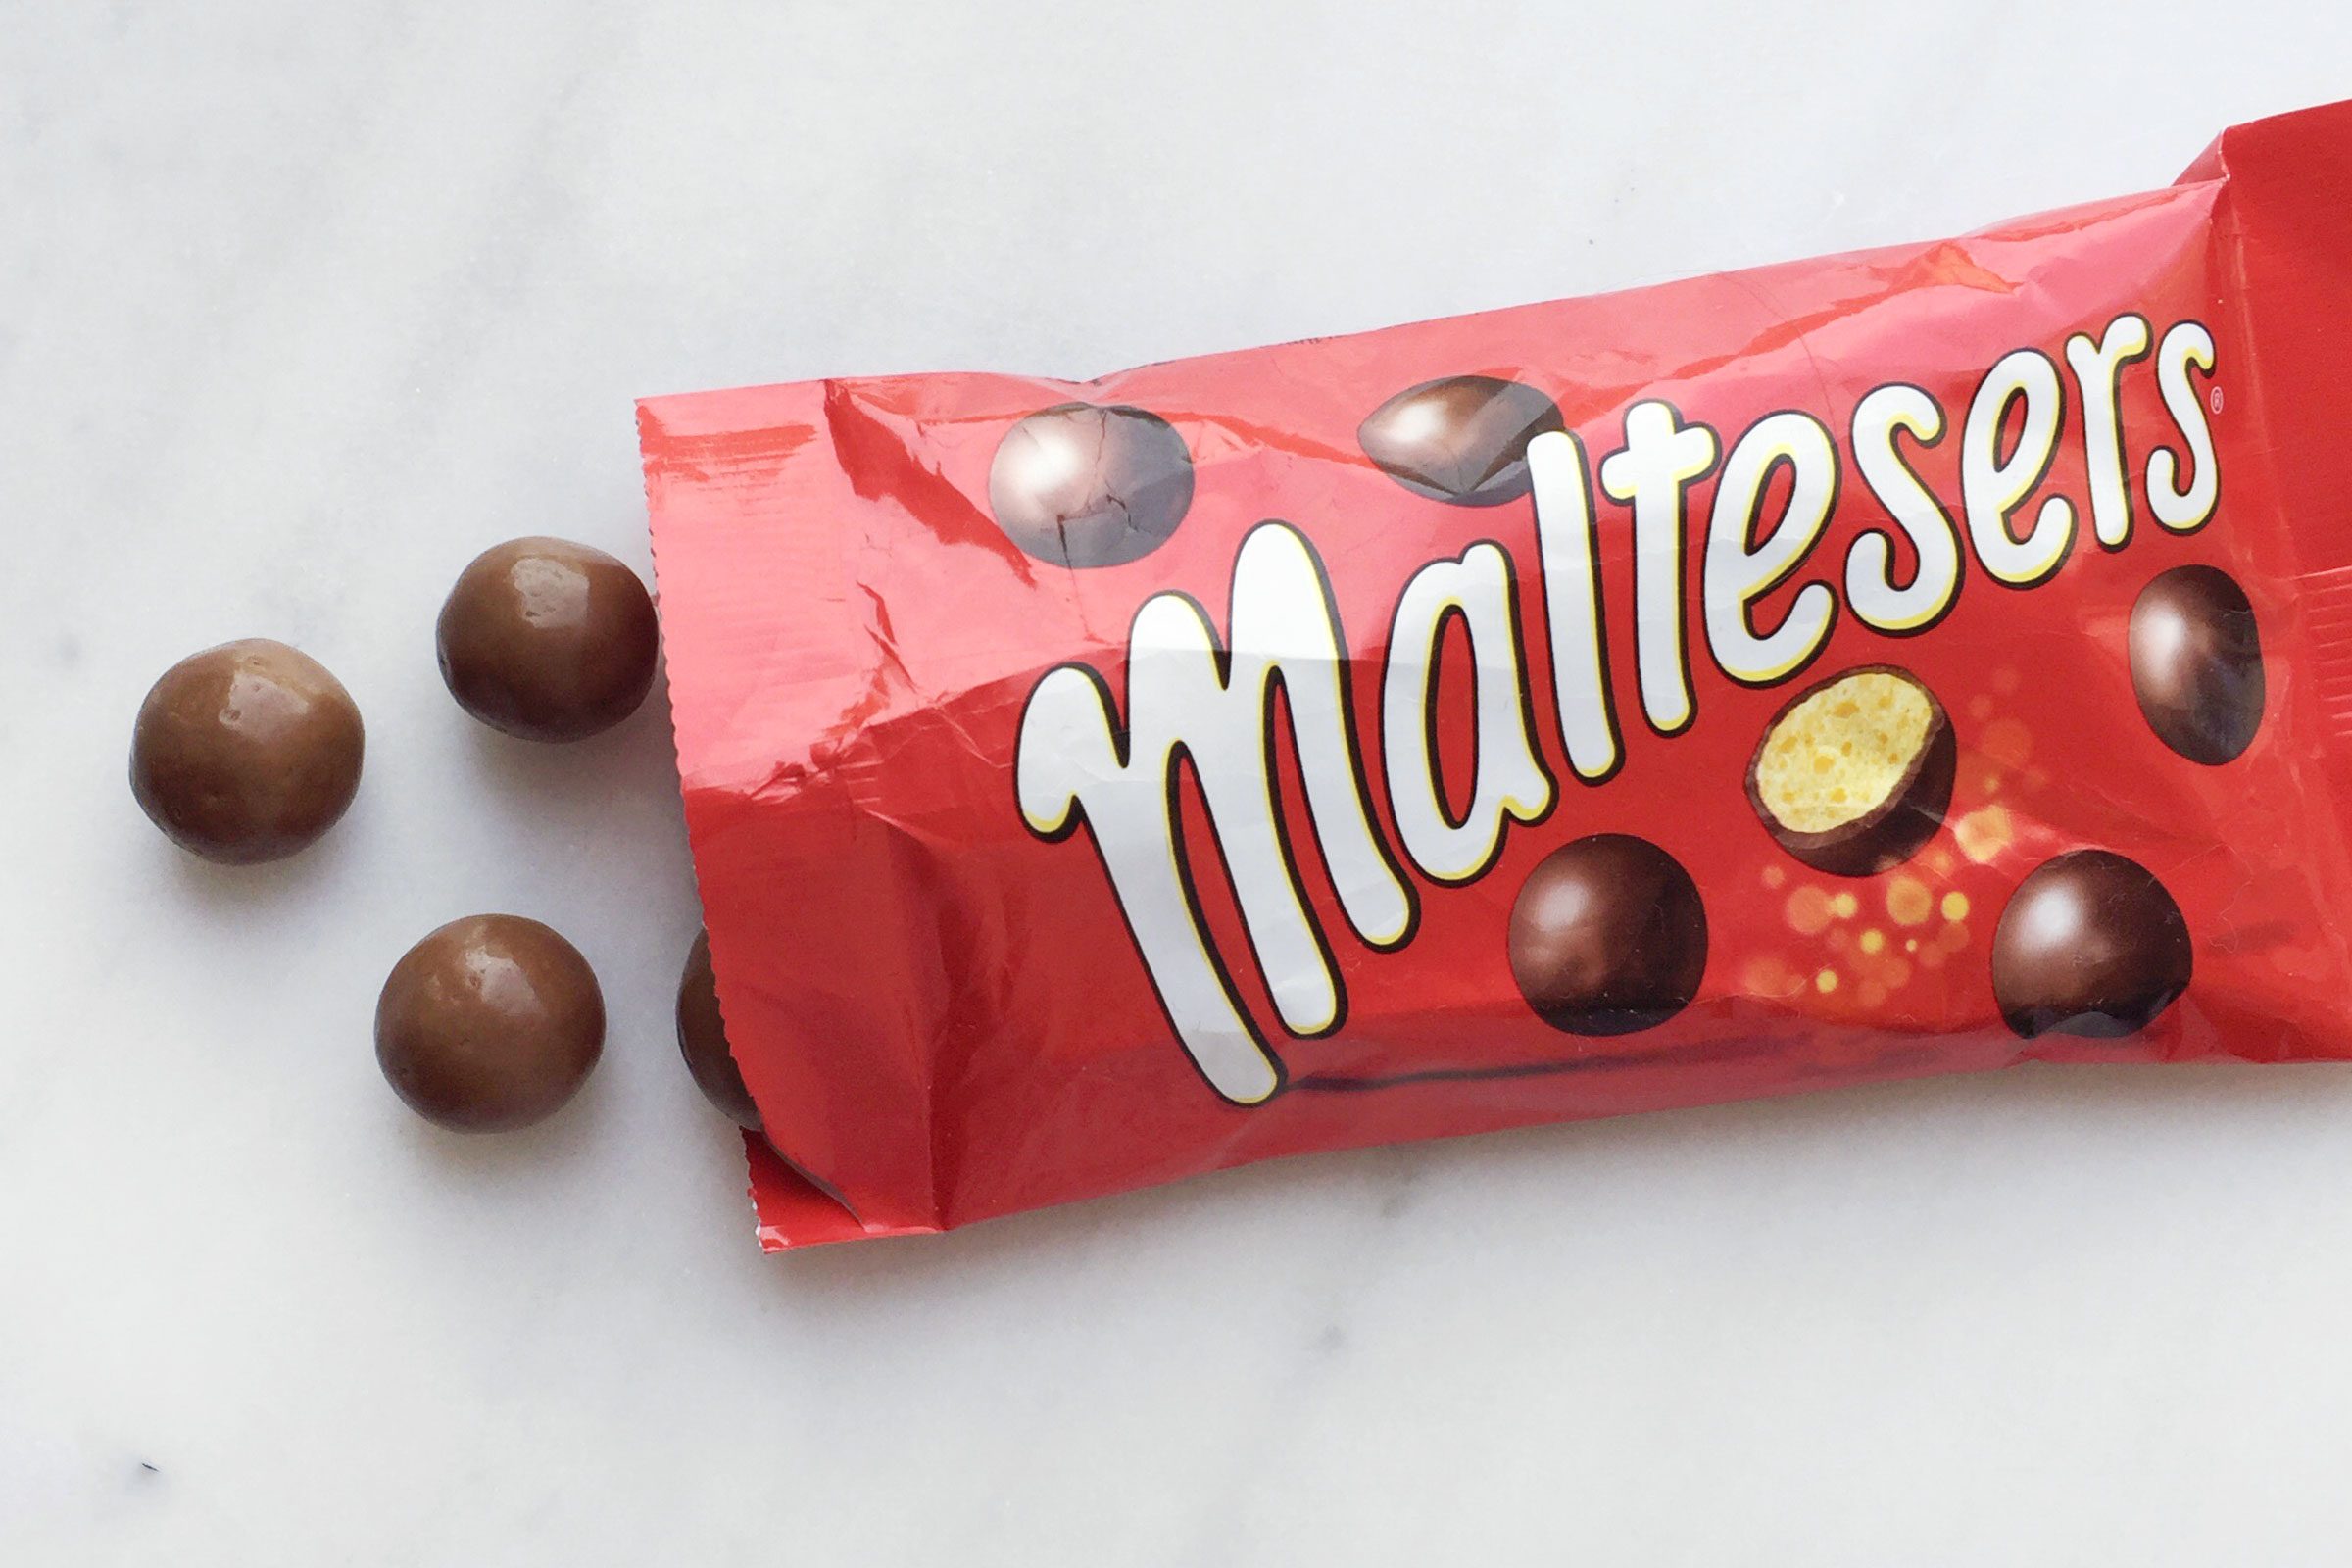 Maltesers chocolates on a marble surface